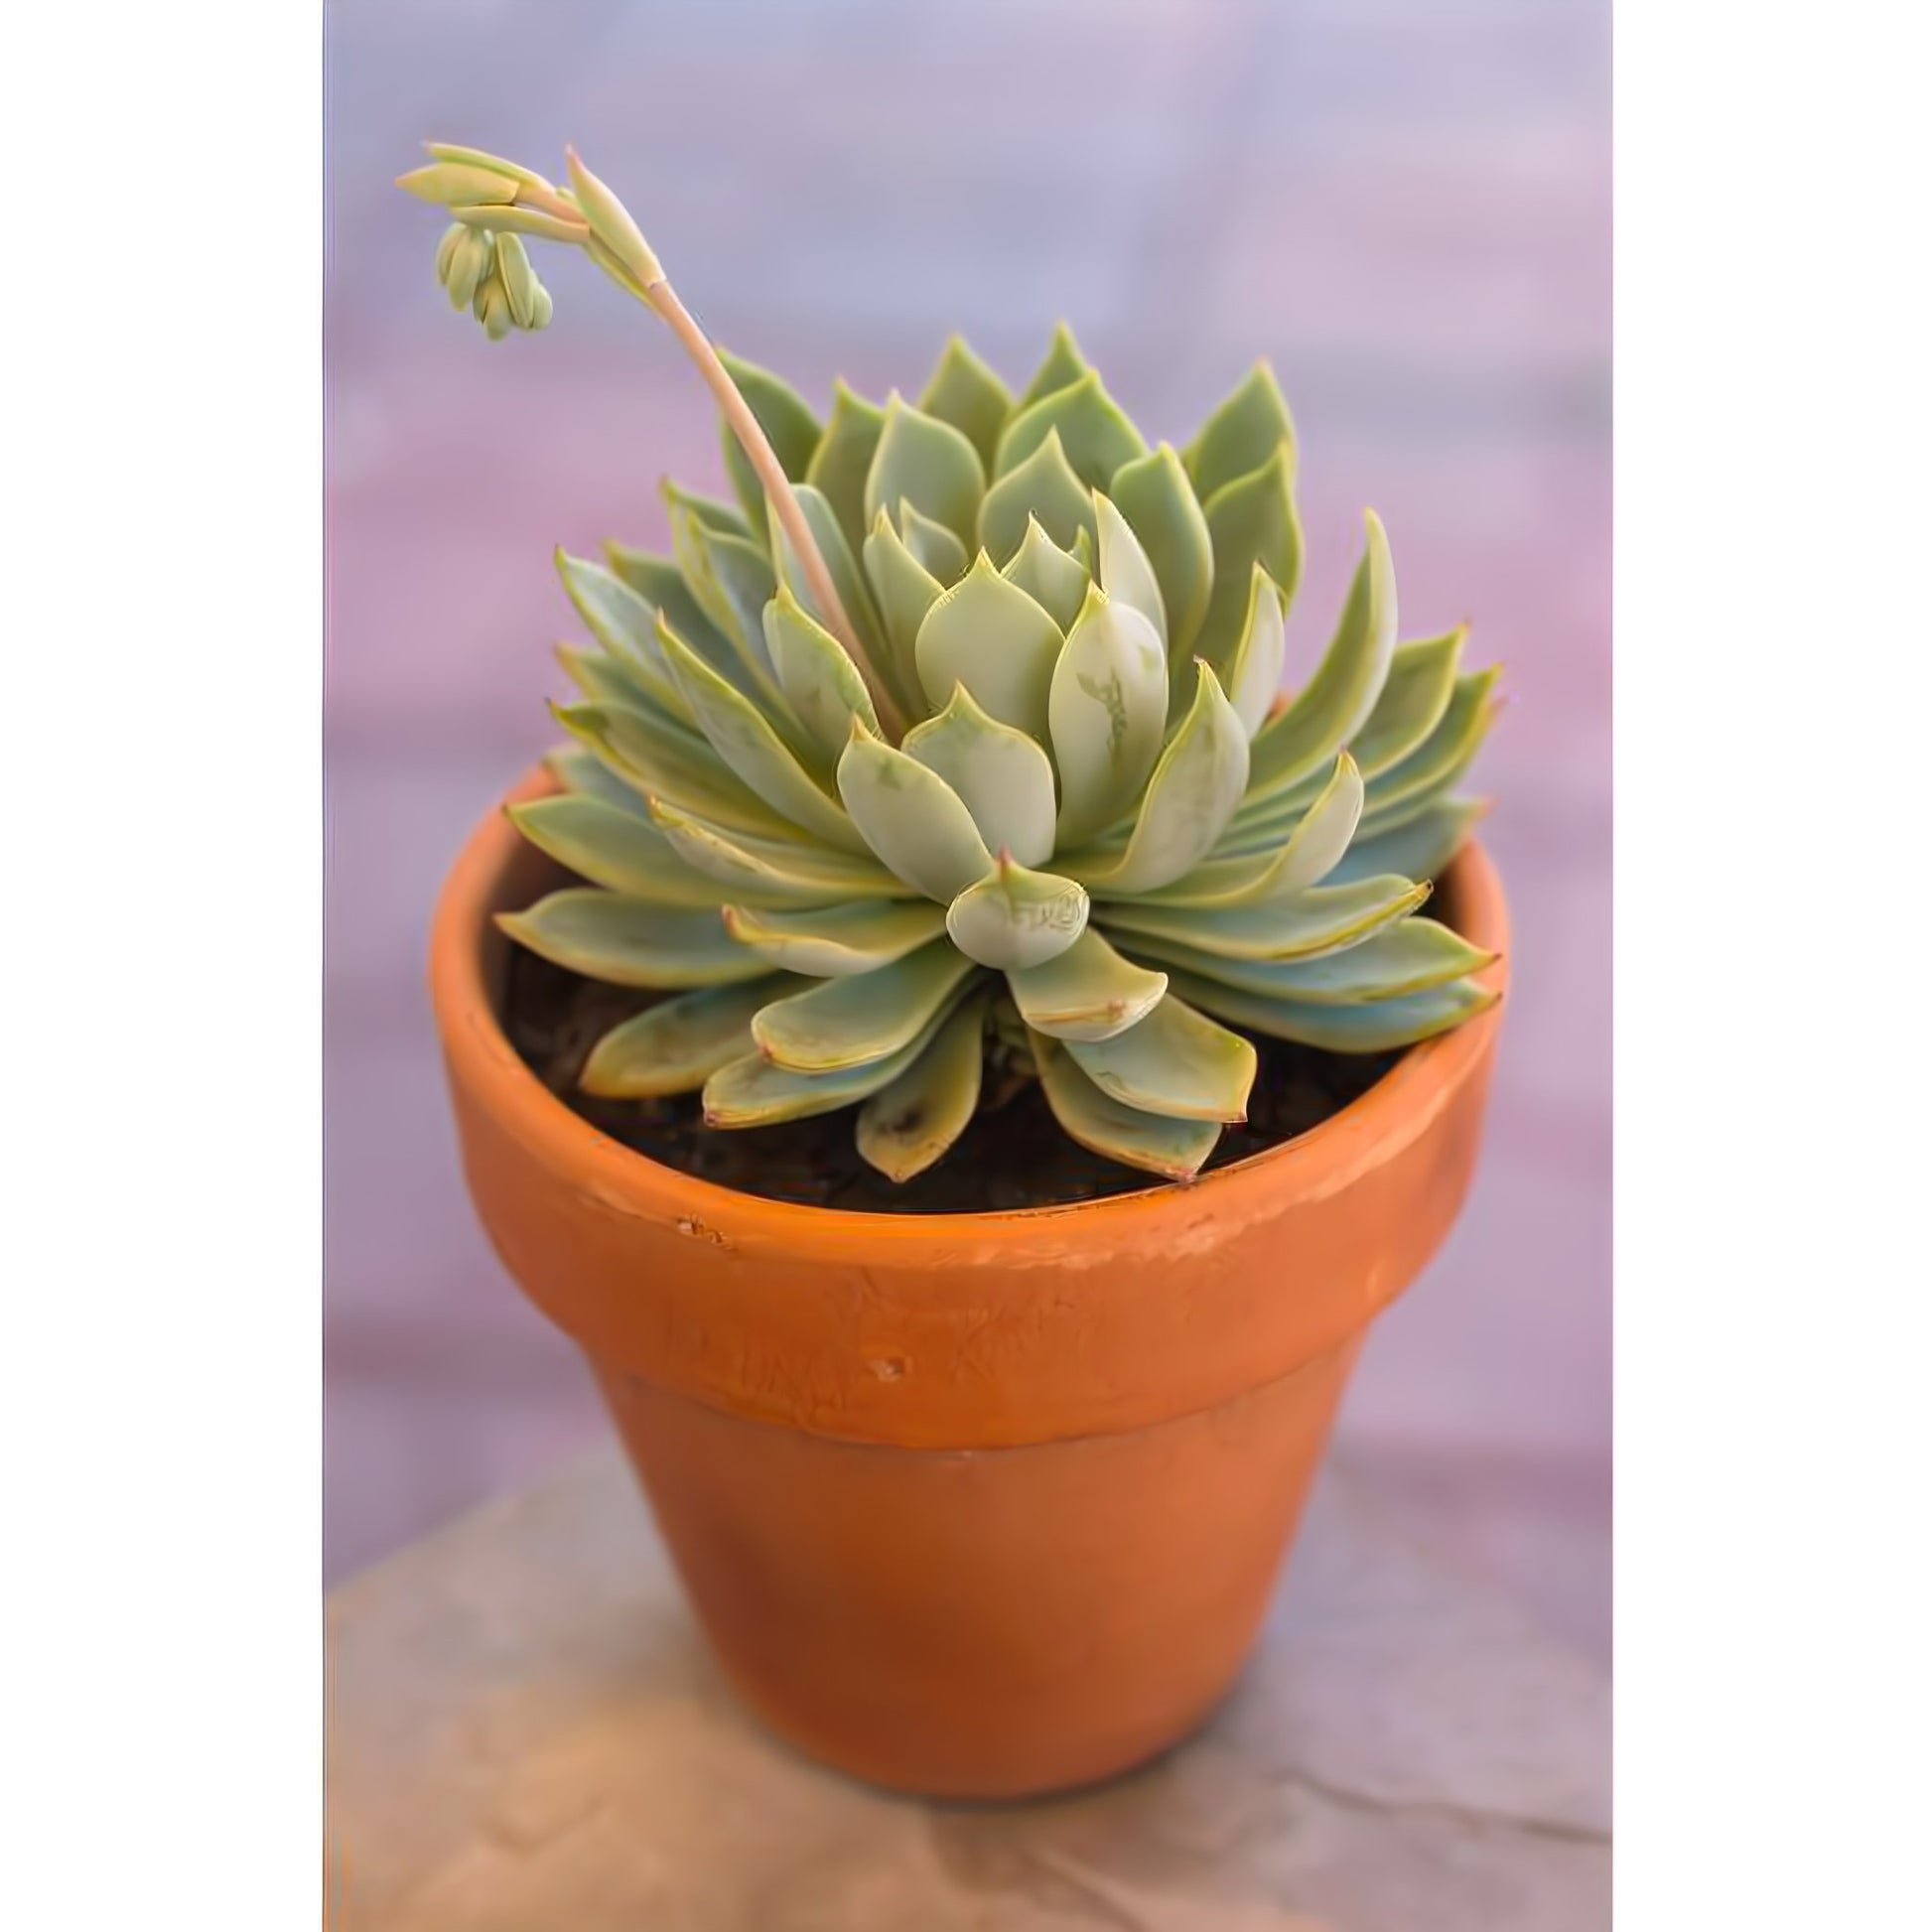 ECHEVERIA SUCCULENT 6" IN CLAY POT - Floral_Arrangement - Flower Delivery NYC